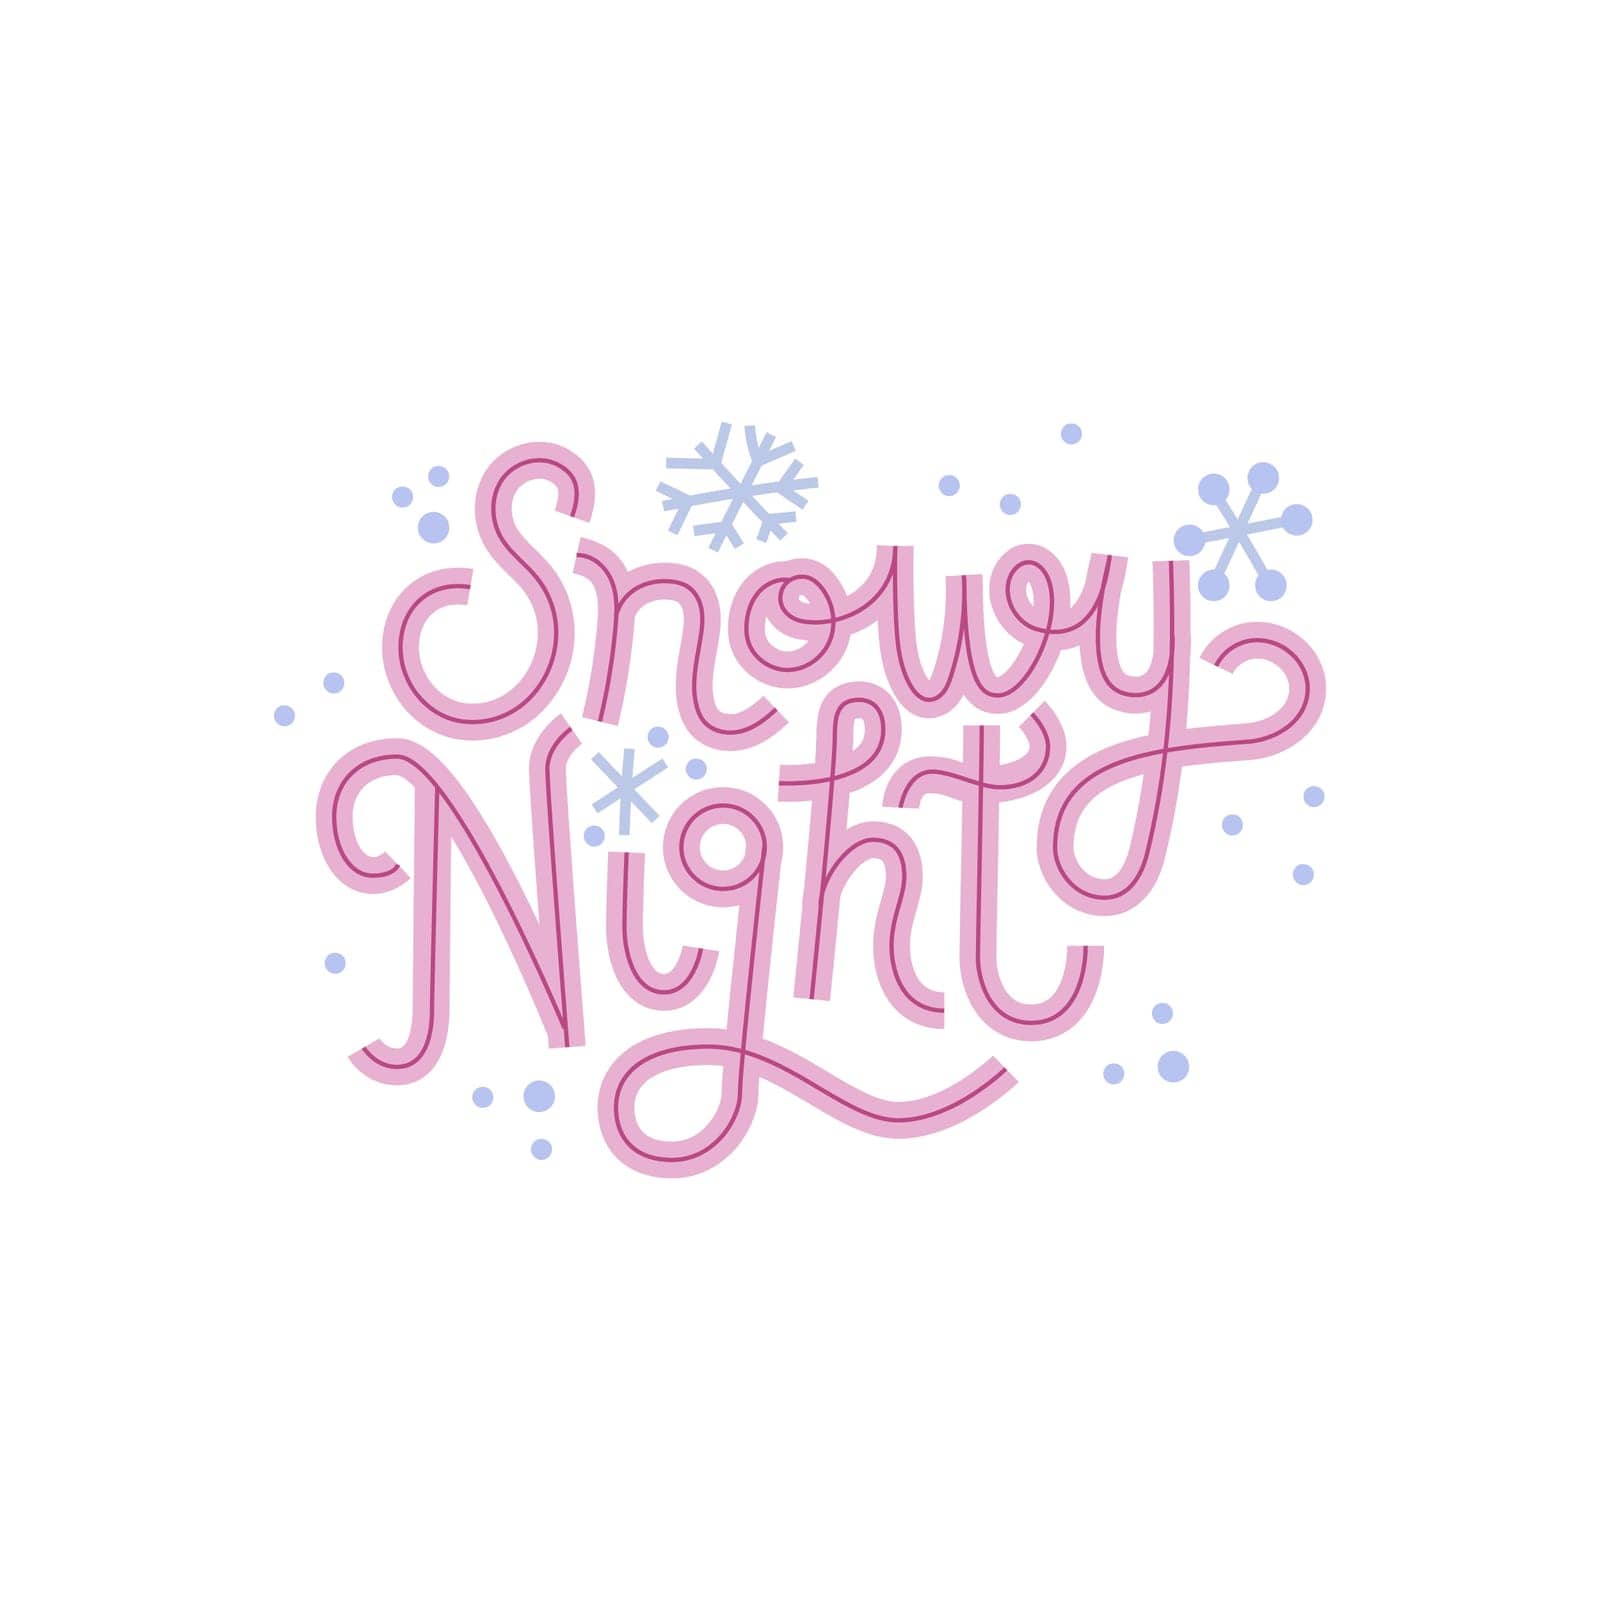 Snowy Night lettering by chickfishdoodles